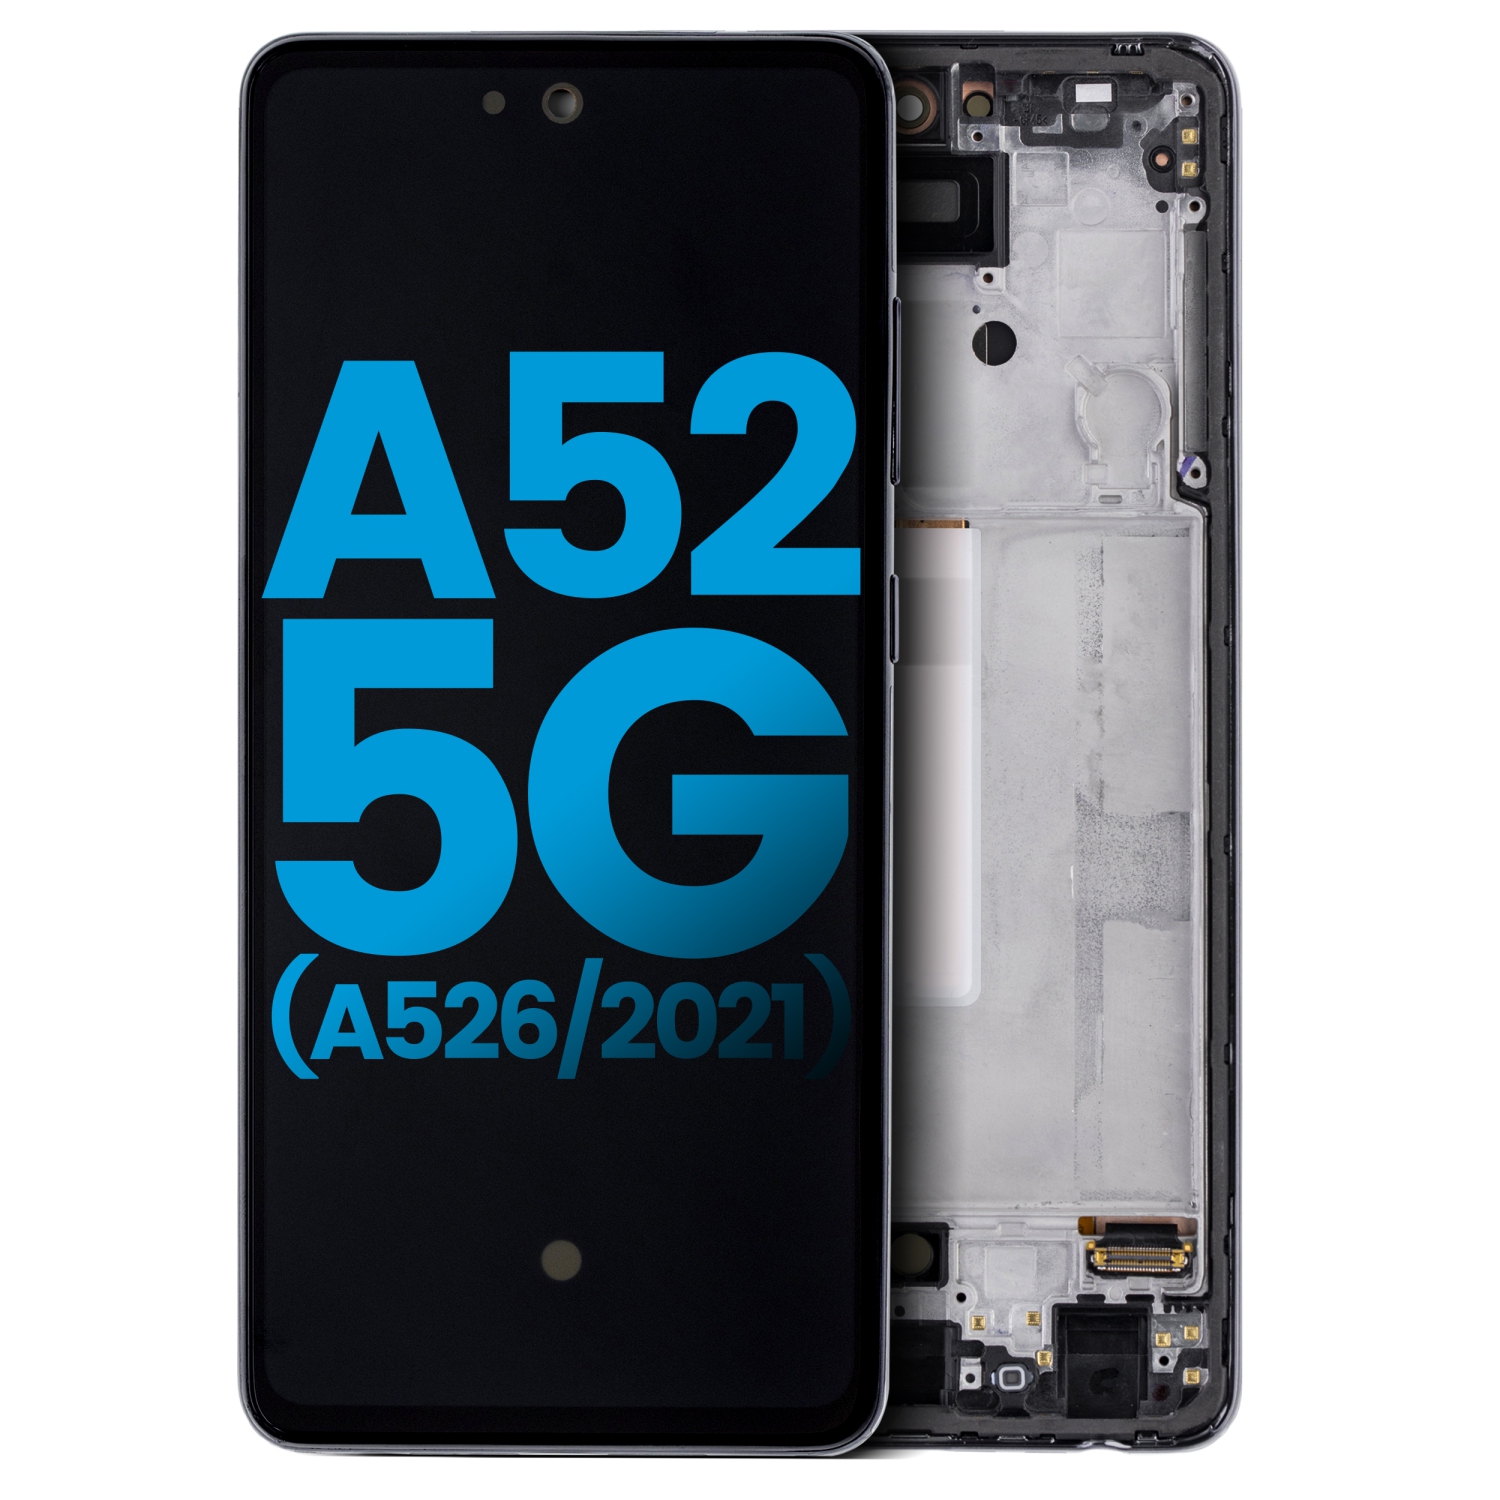 Replacement LCD Assembly With Frame Compatible For Samsung Galaxy A52 5G (A526 / 2021) / A52S (A528 / 2021) (Aftermarket : Incell) (Awesome Black)